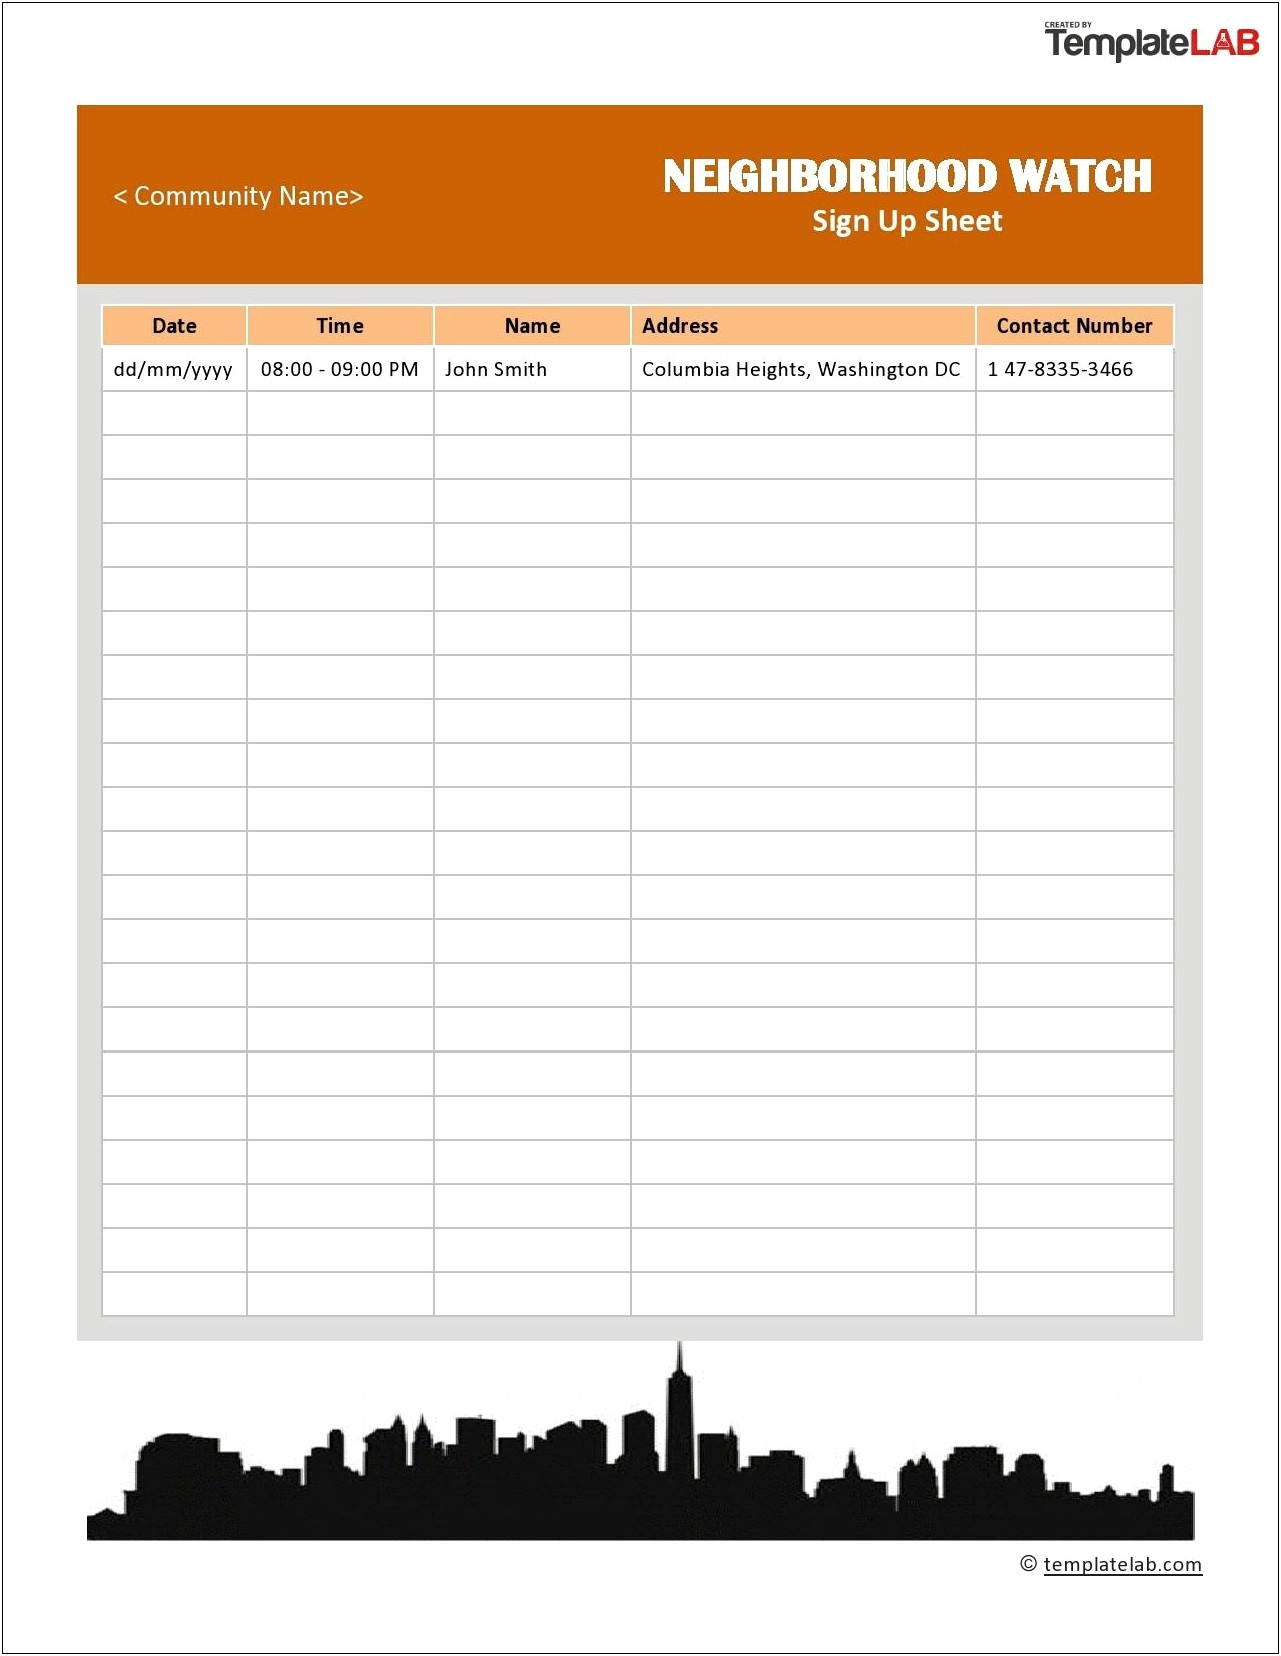 Microsoft Word Template Sign Up Sheet